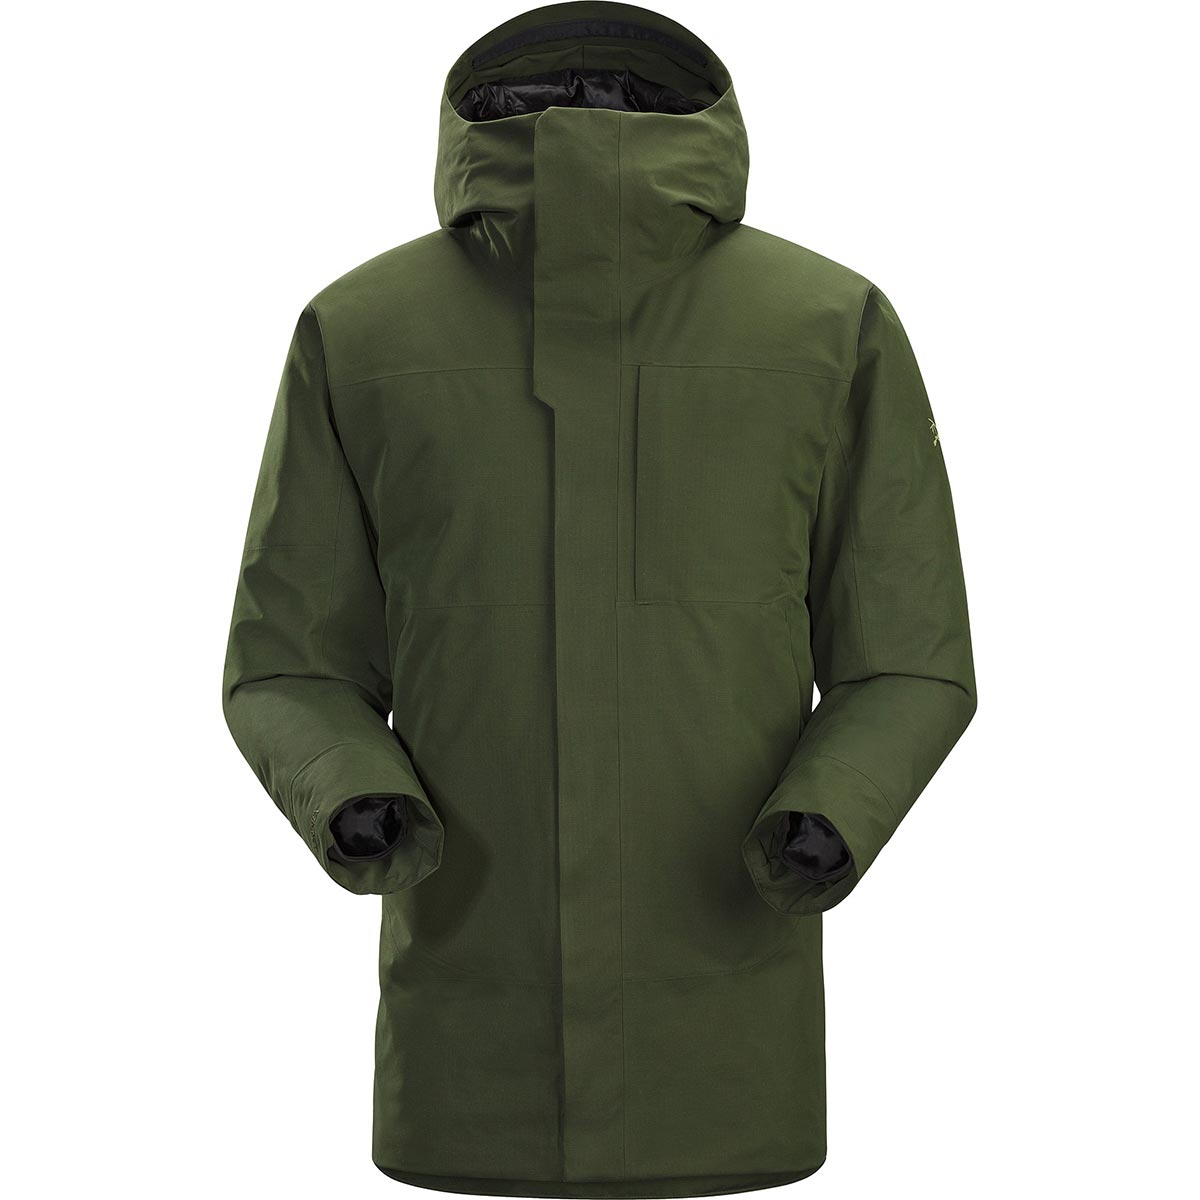 Arc'teryx Therme Parka, men's, discontinued color's, 2016-17 (free ...